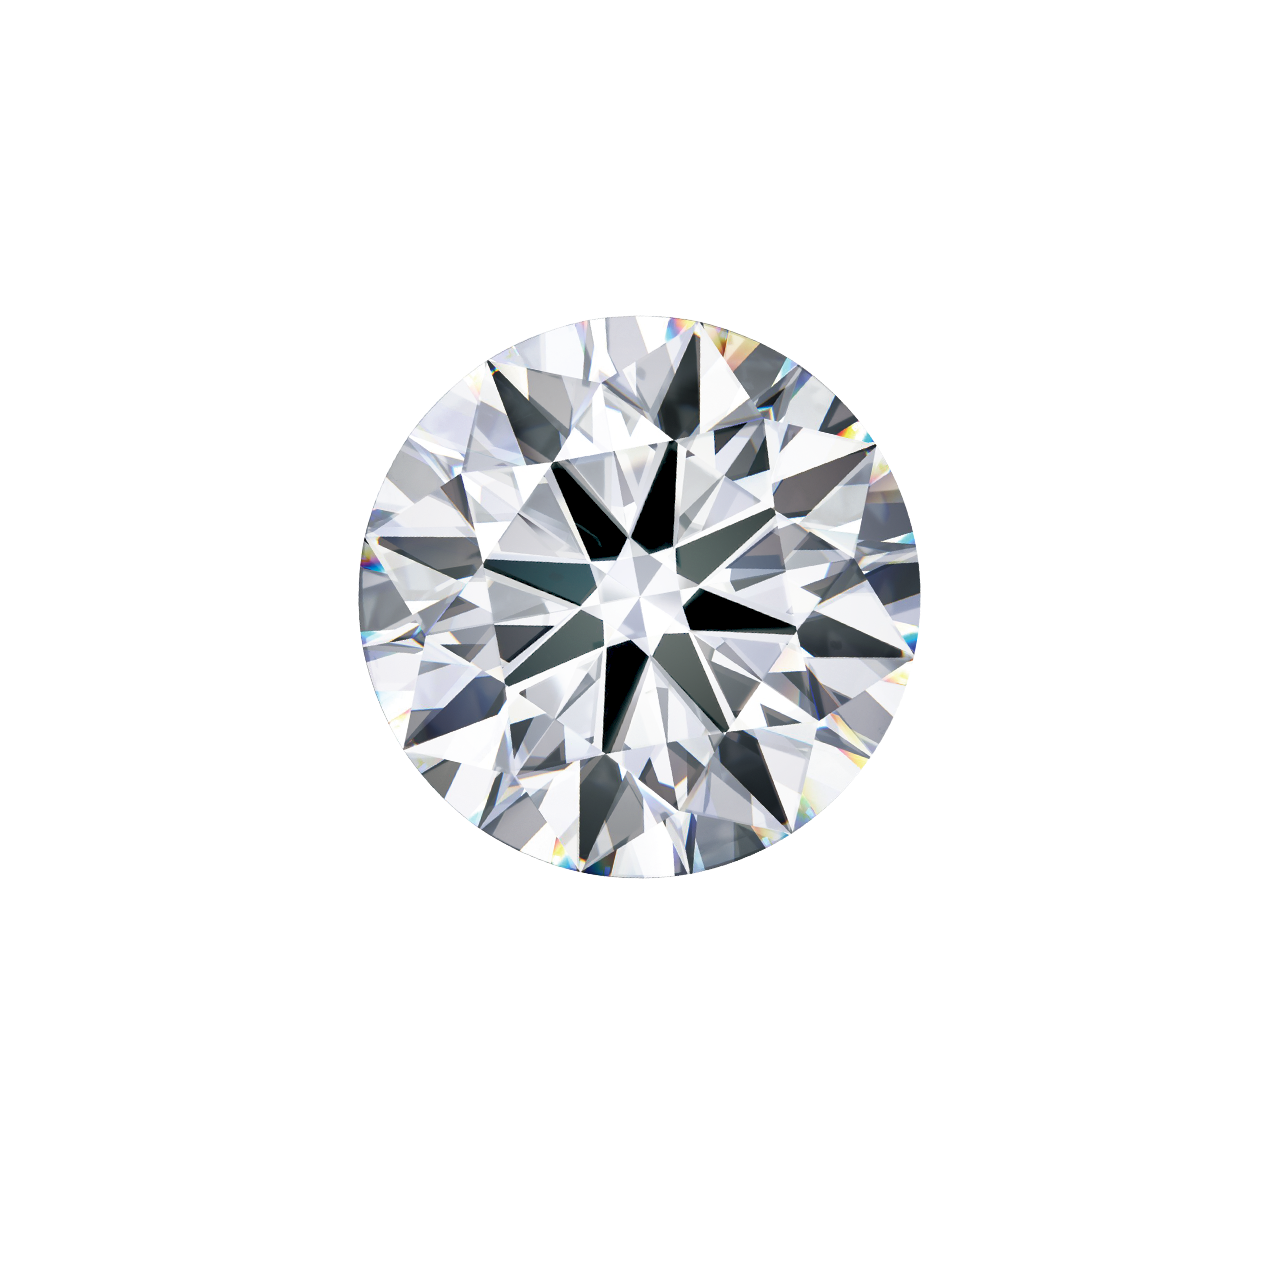 GIA 10.26克拉 全美無瑕白鑽裸石
HIGHLY IMPORTANT UNMOUNTED FLAWLESS DIAMOND